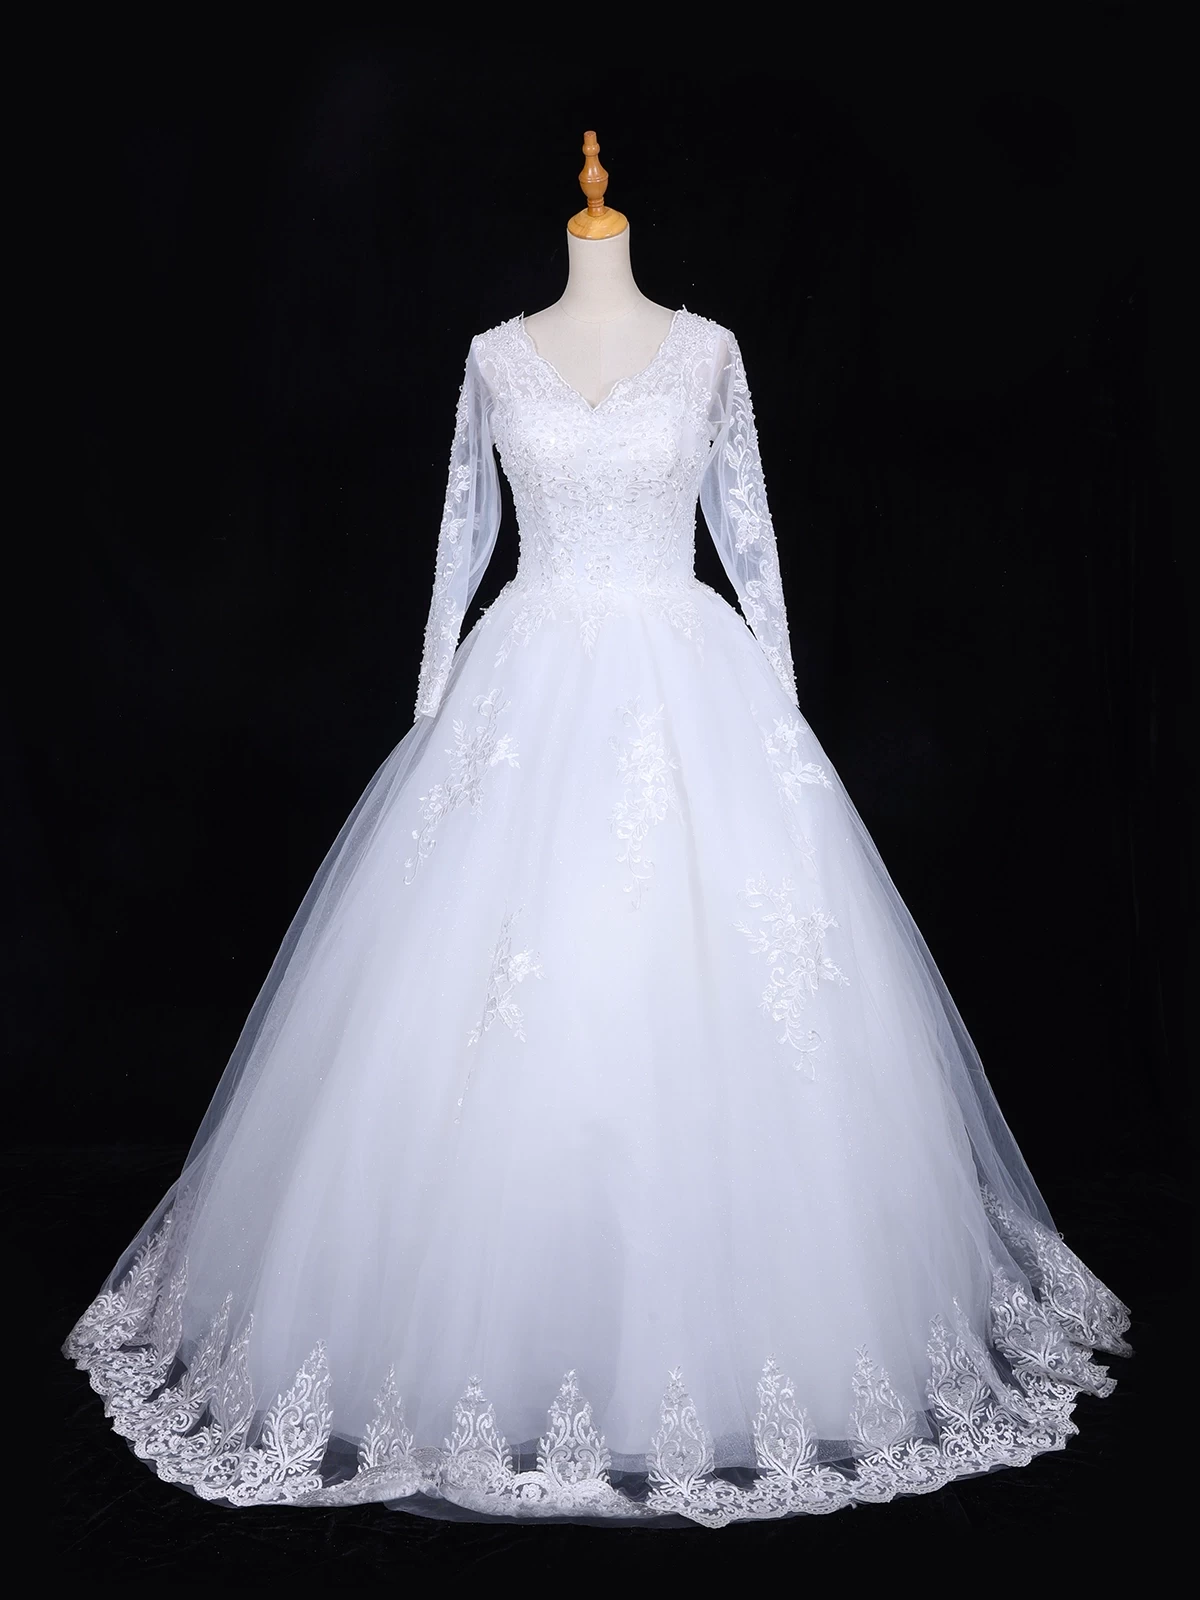 White Net Ball Gown Embellished with Floral Laces and Sequins